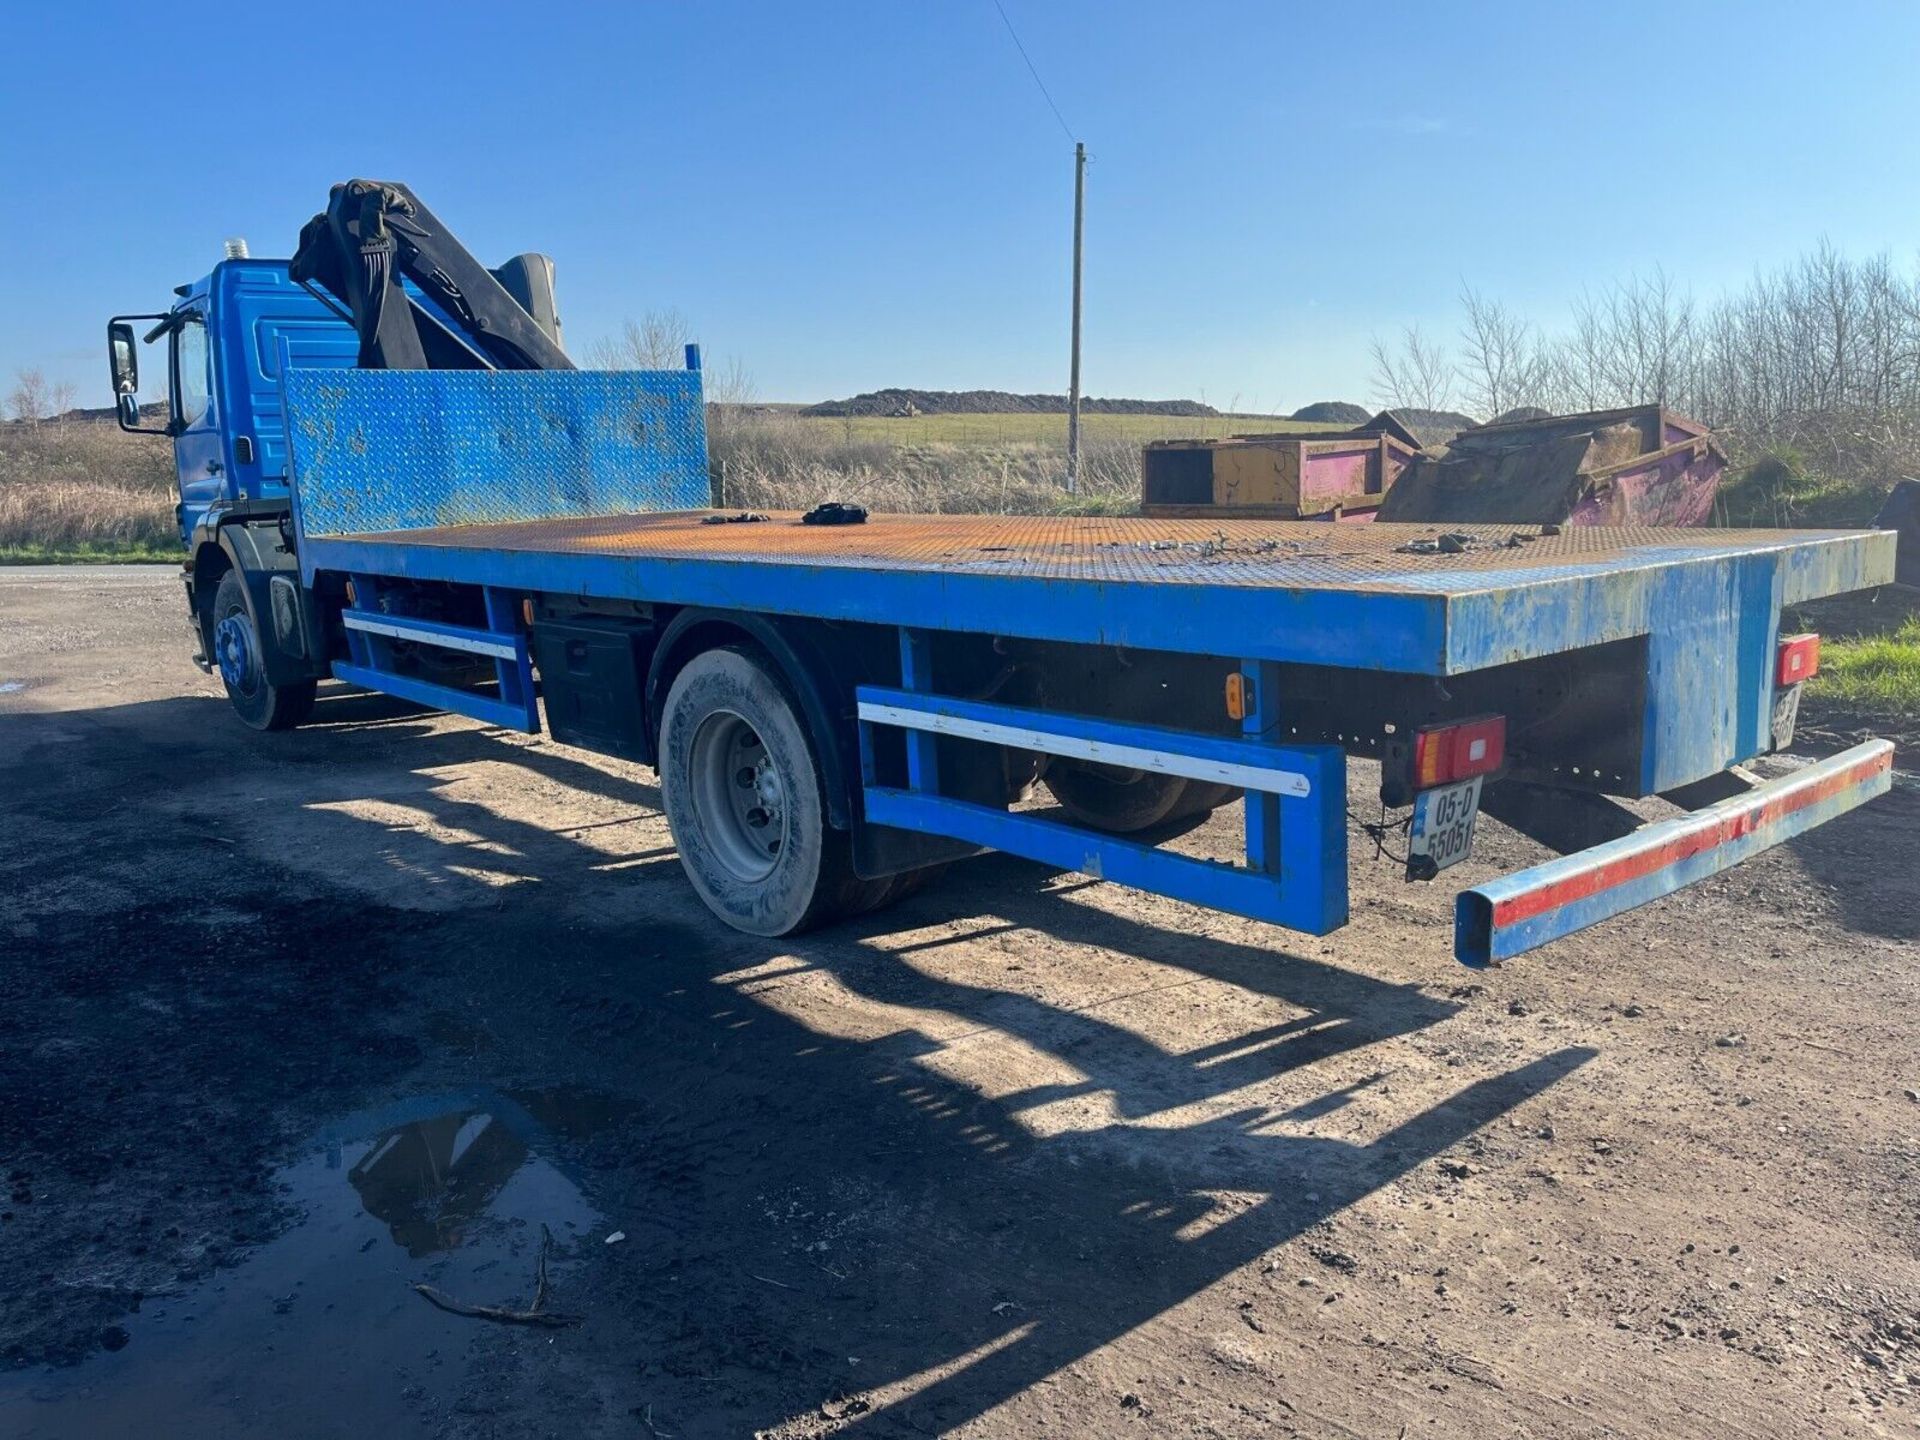 2005 MERCEDES AXOR 4 X 2 FLATBED WITH PALFINGER CRANE - Image 2 of 14